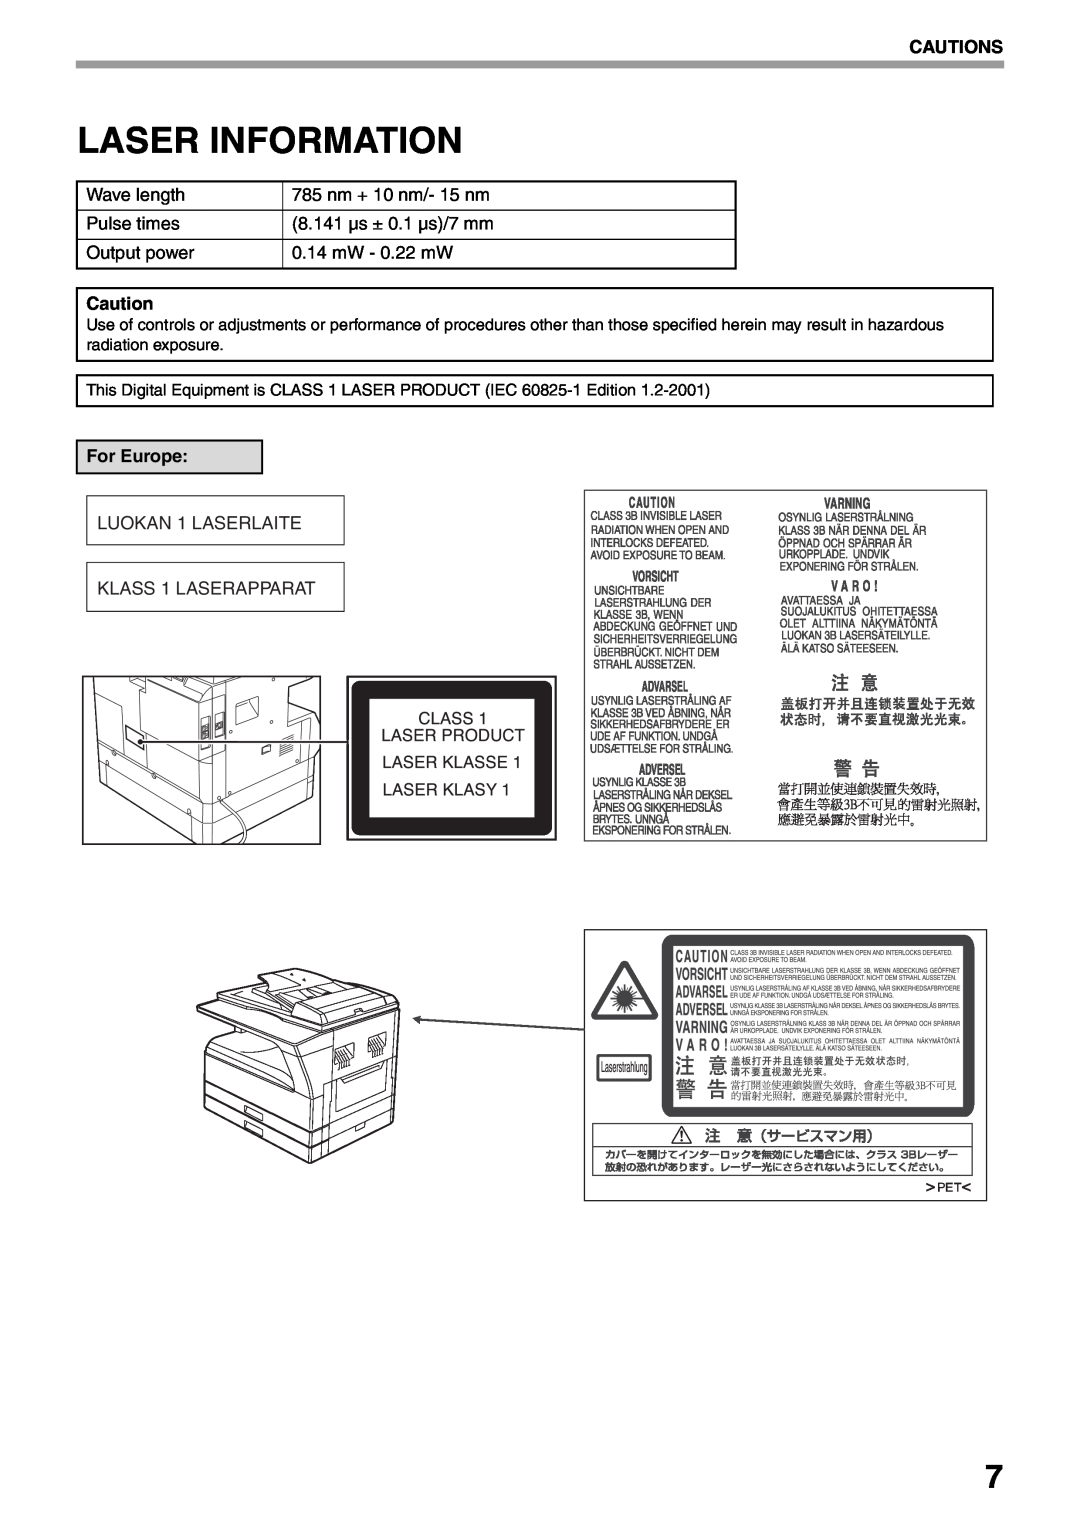 Sharp MX-M200D, MX-M160D operation manual Laser Information, Cautions, For Europe 